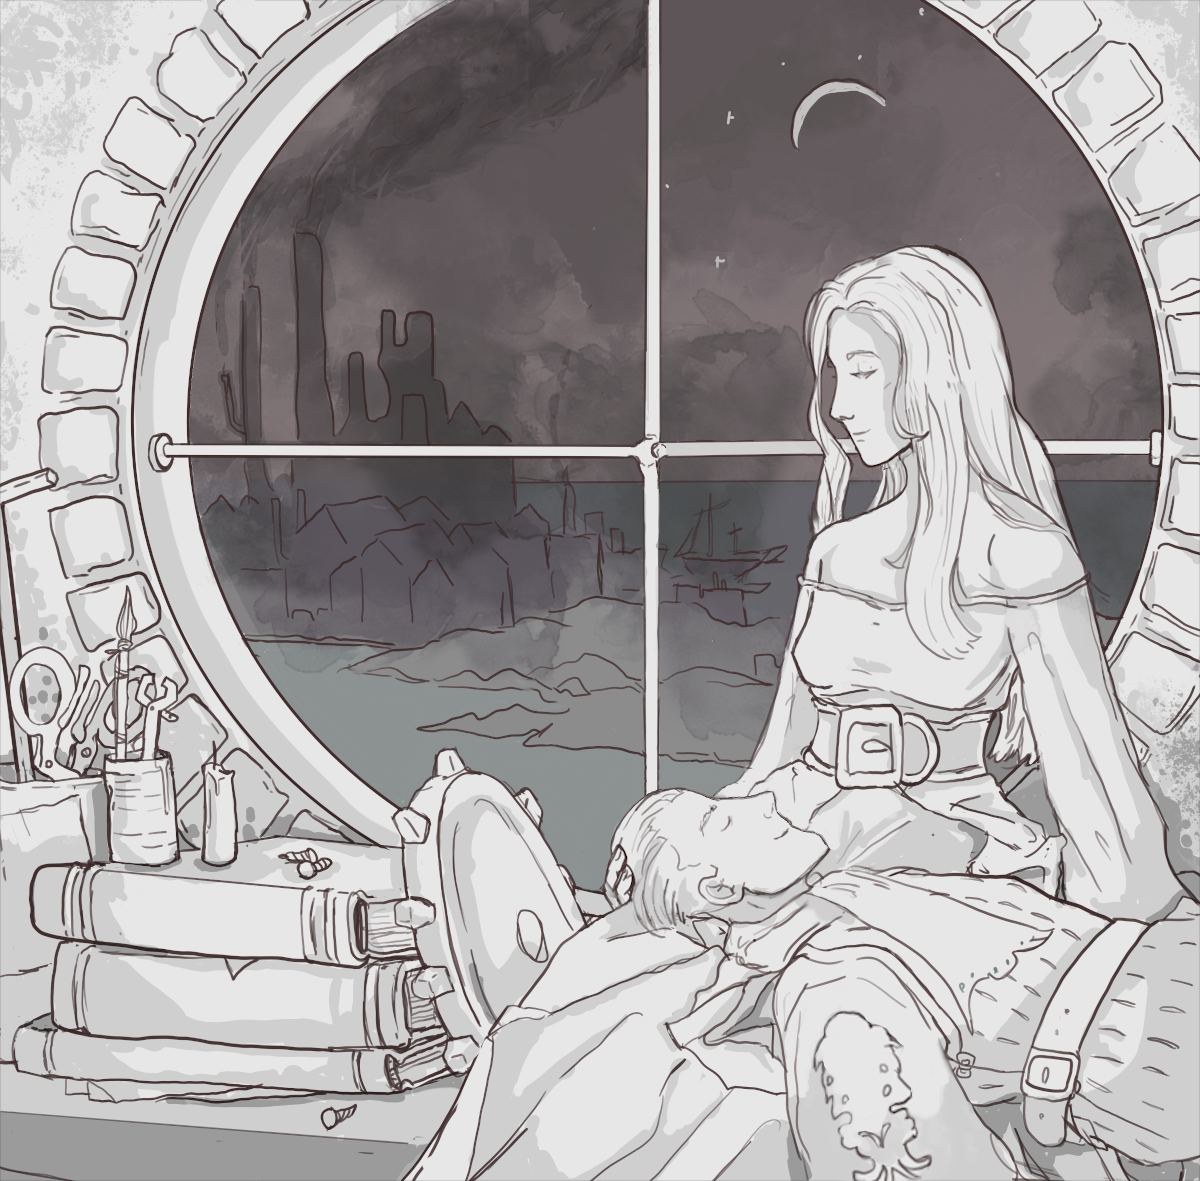 It is night. Beowulf Cadmus sleeps in the lap of Reis Duelar, now a human being once more. They are situated in front of a large round window and surrounded by books and machinists' equipment. Reis smiles as her head is framed against the backdrop of Goug's buildings and factories.